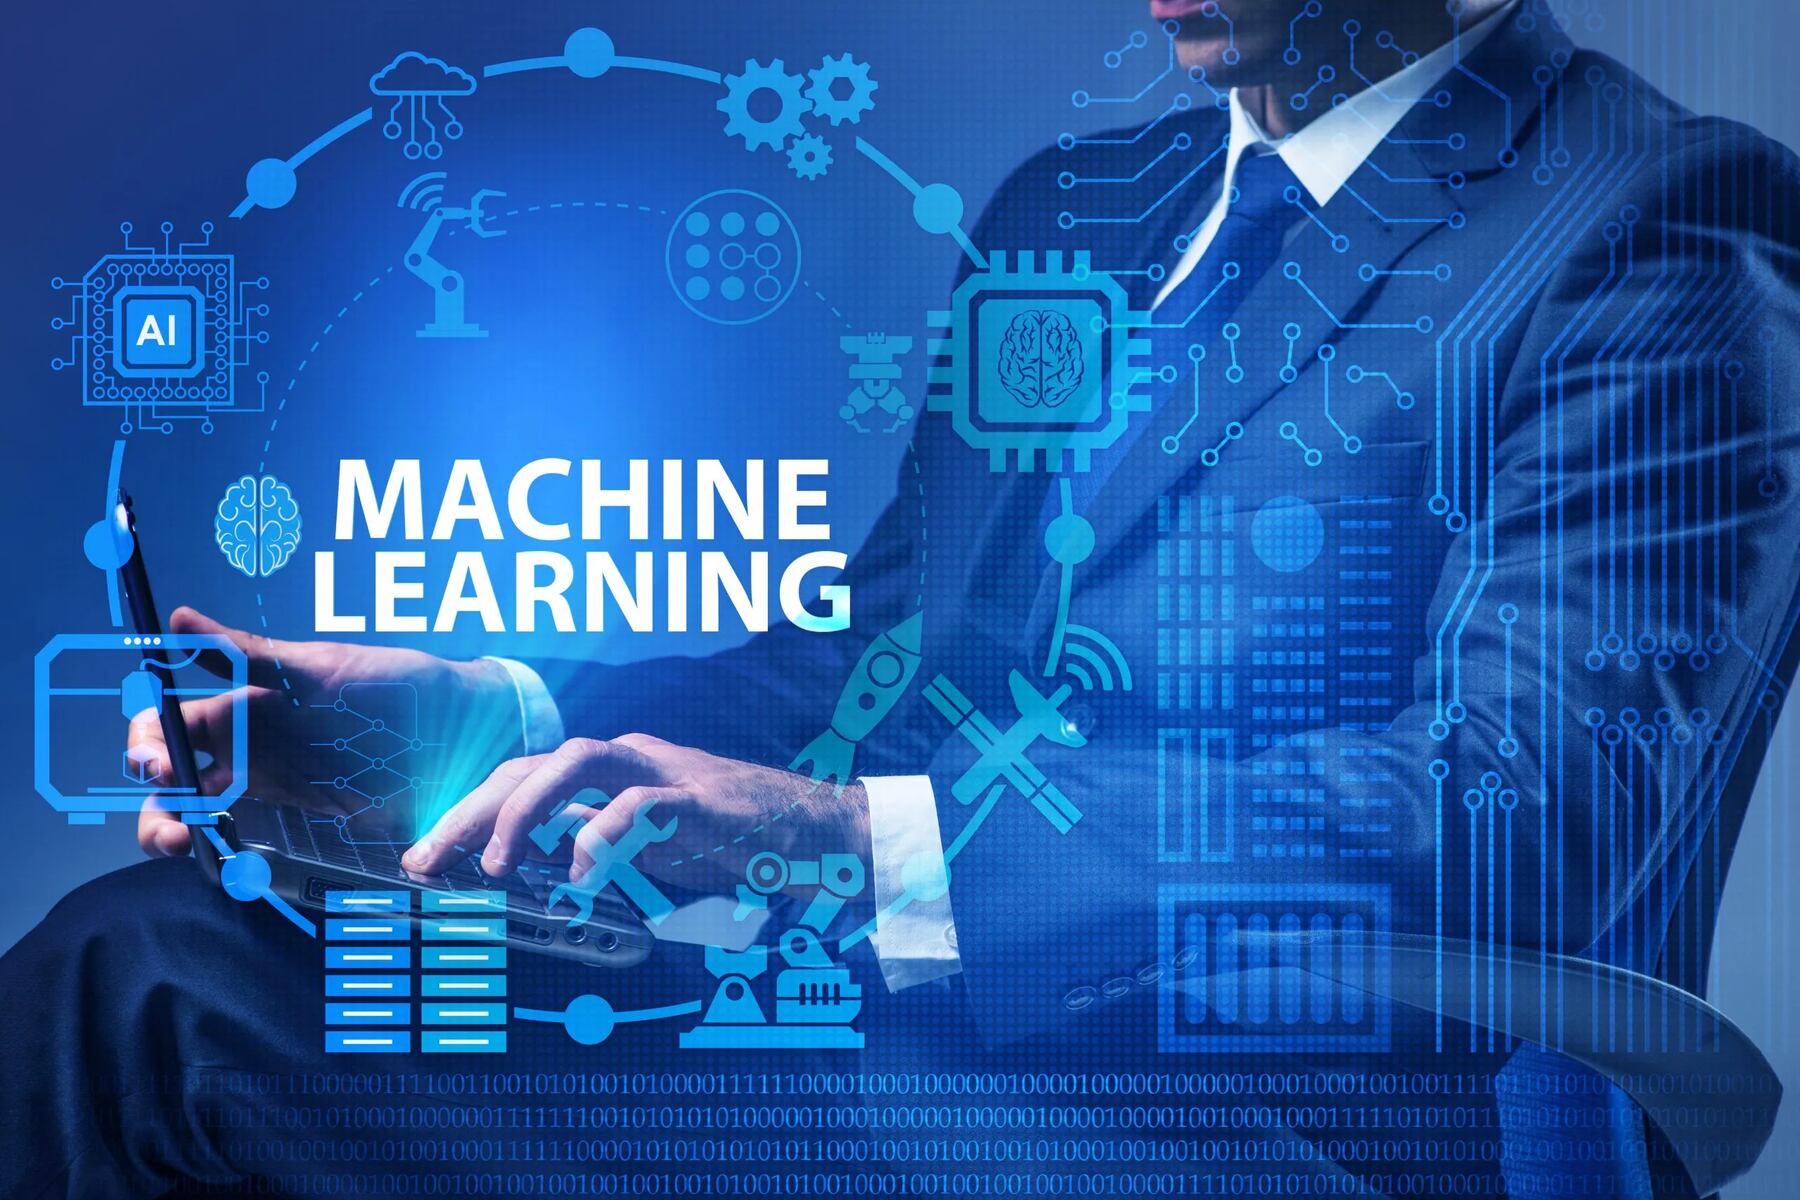 What Is The First Step When Adding A Machine Learning Component To An Existing System